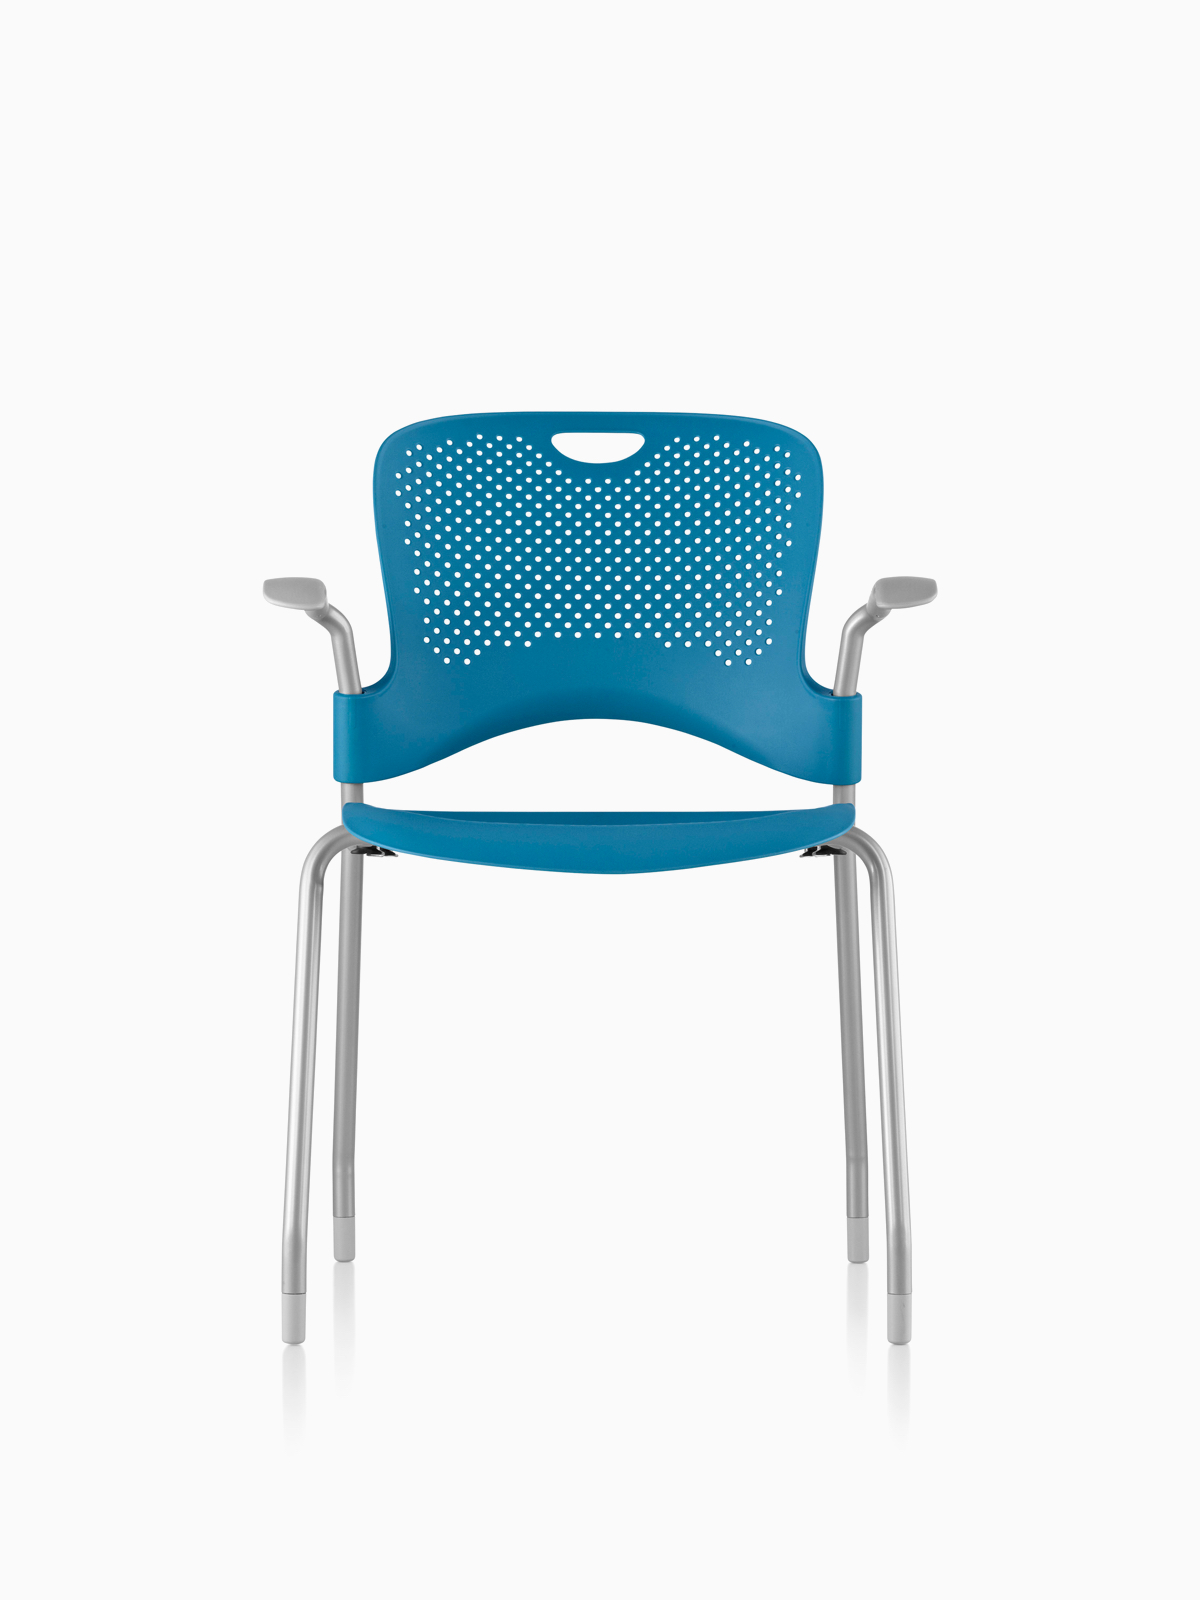 Blue Caper Stacking Chair. 